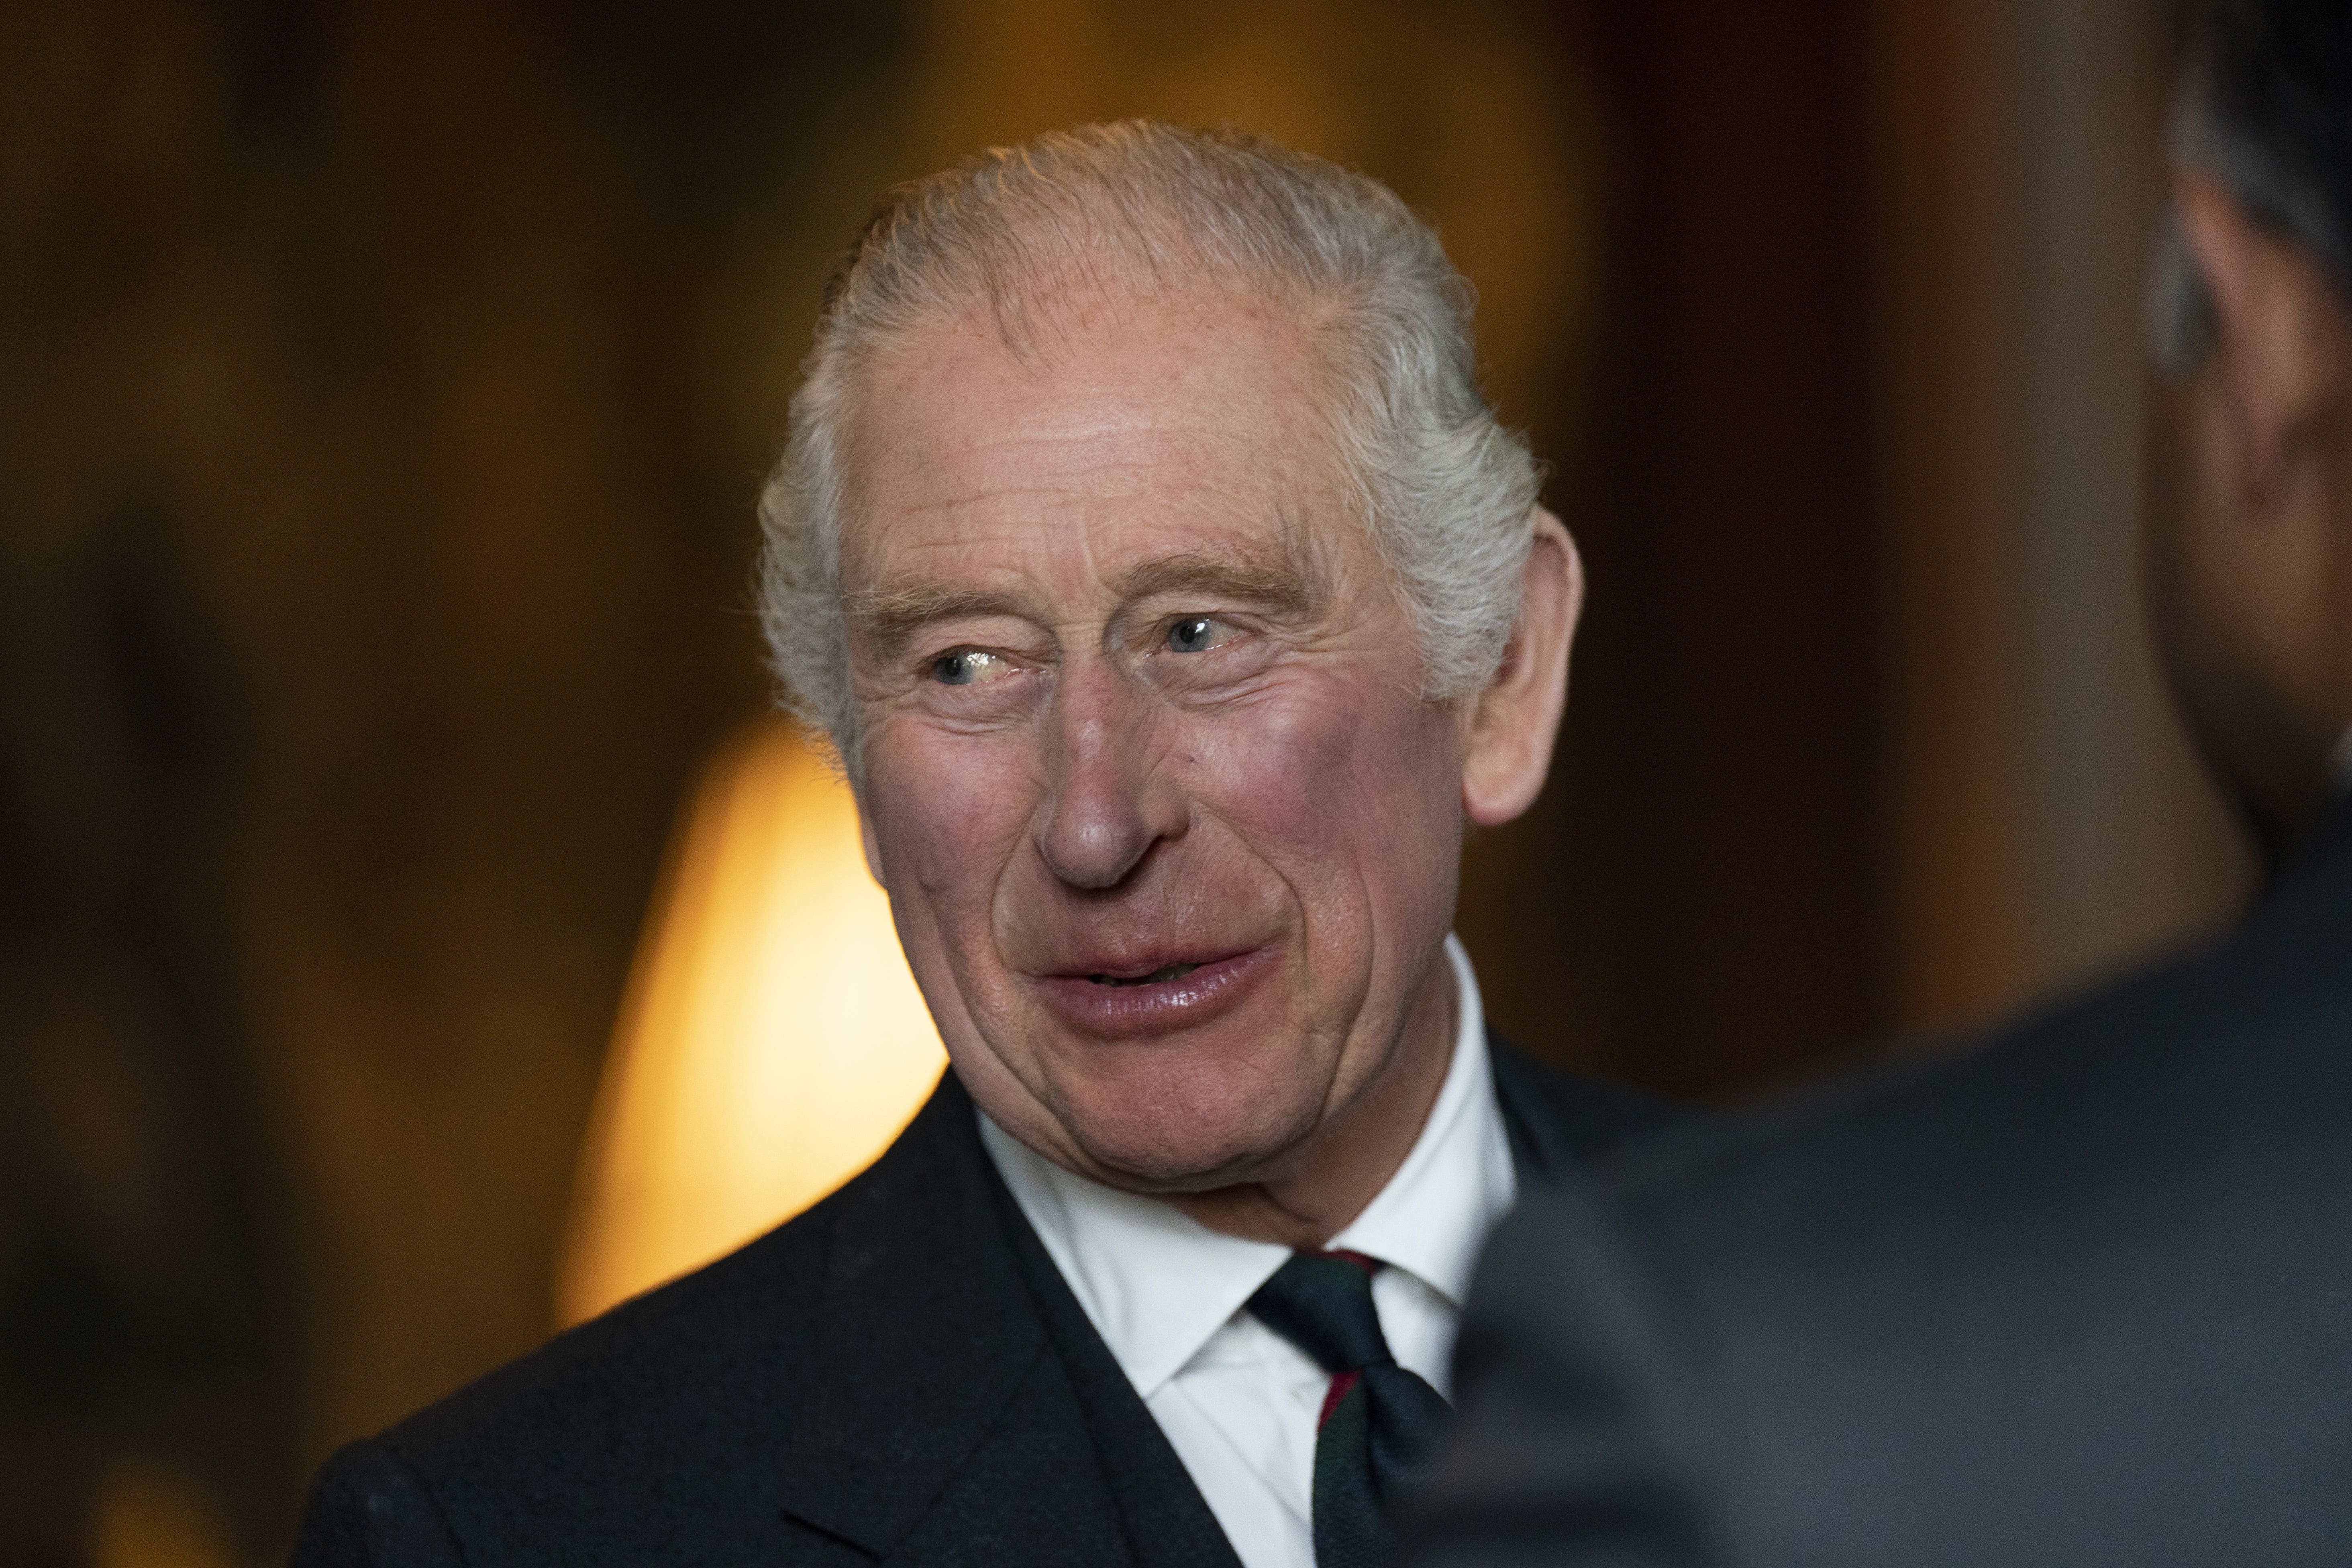 Charles will be crowned monarch during a ceremony likely to be staged next summer (Kirsty O’Connor/PA)